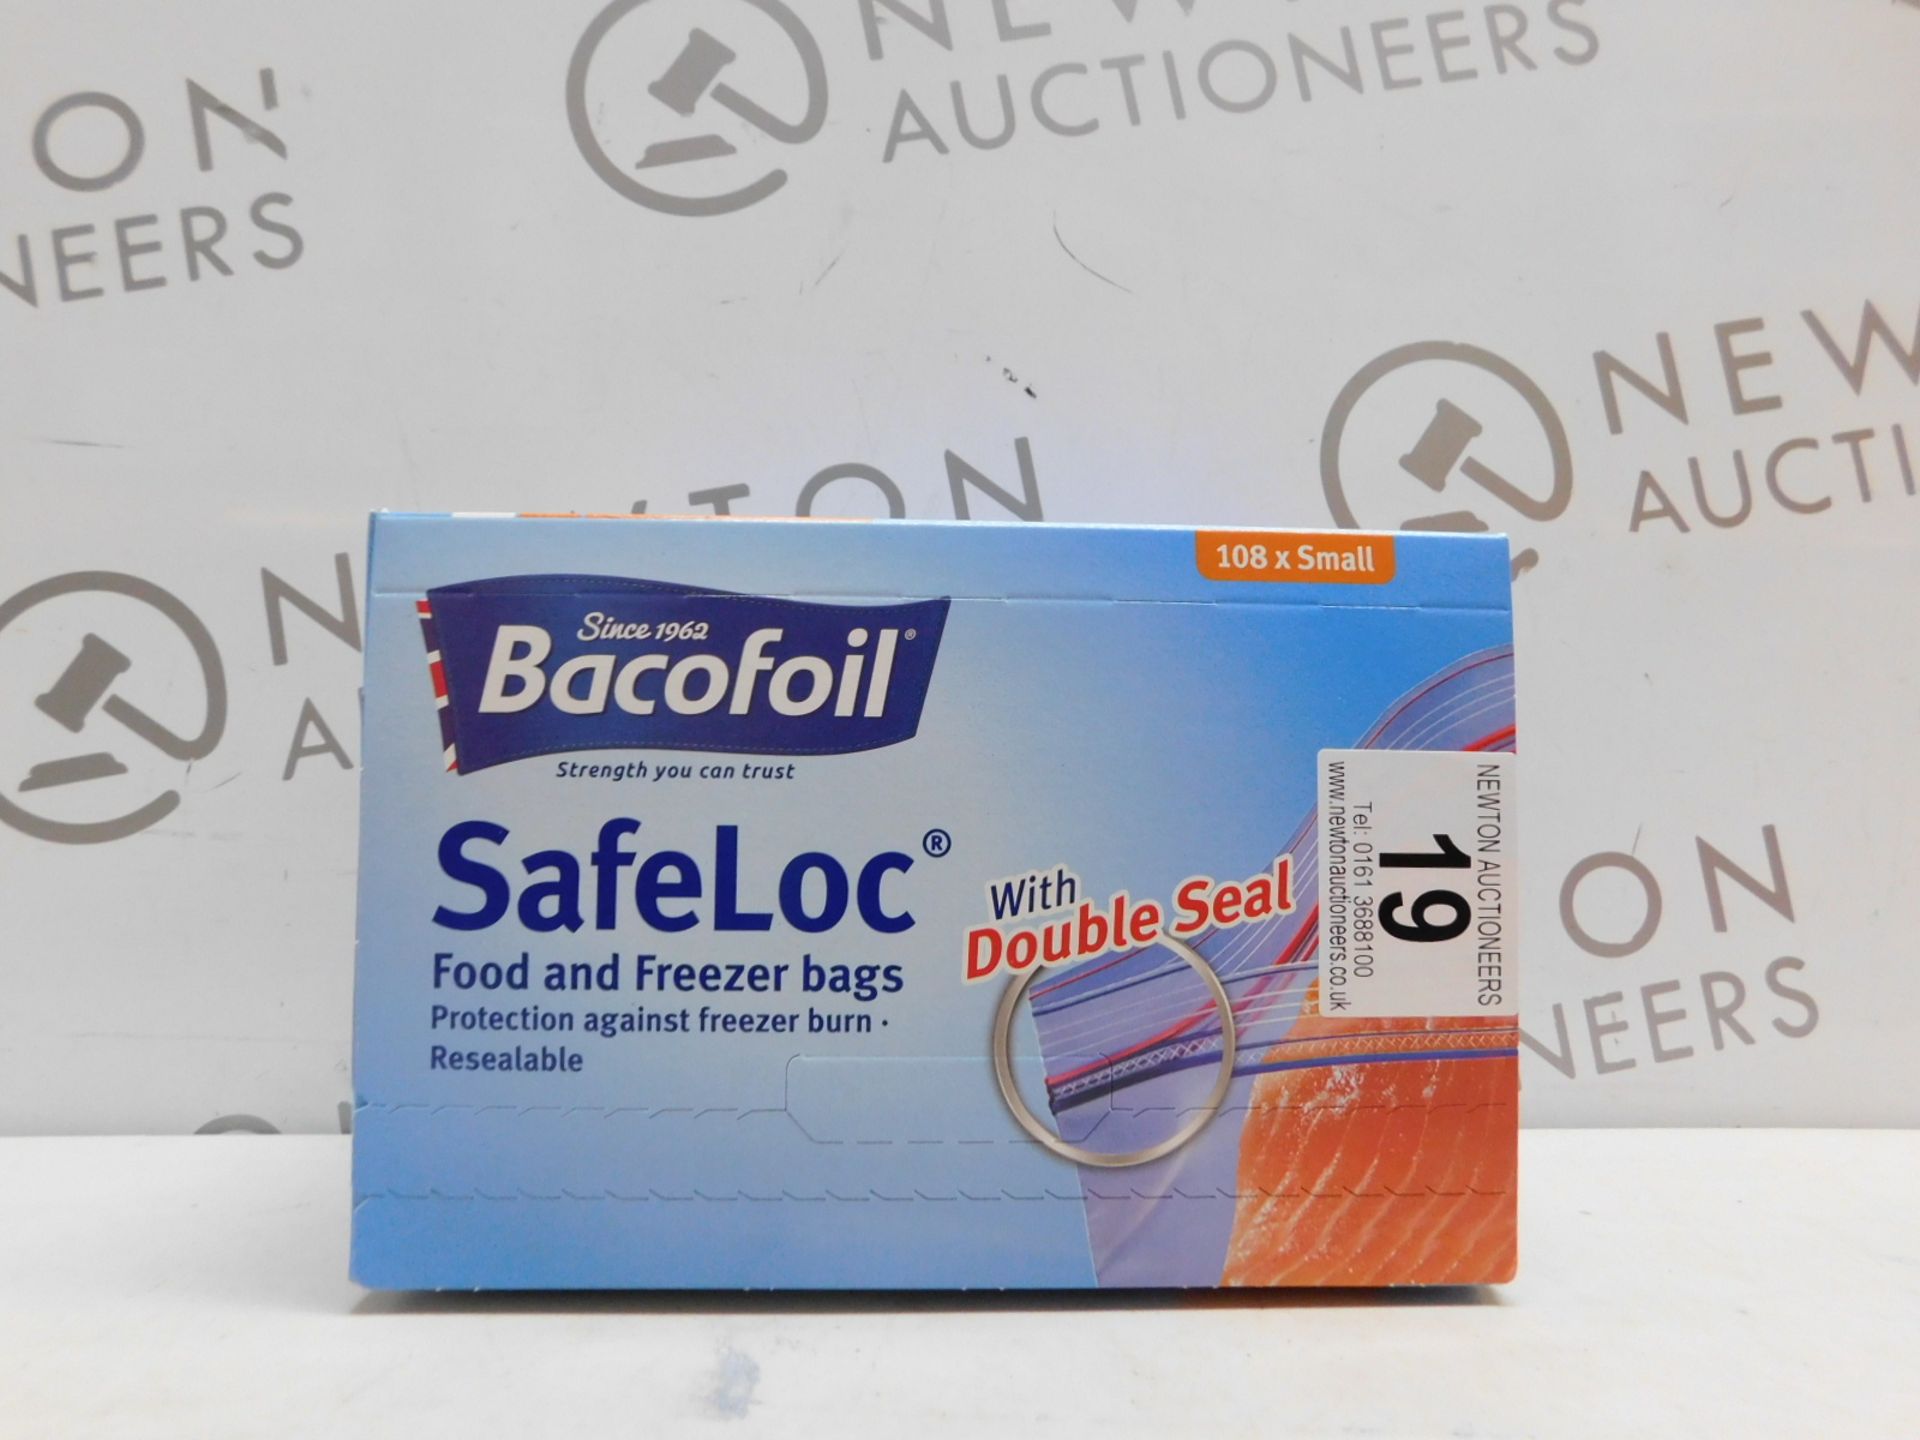 1 BOX OF BACOFOIL SAFELOC FOOD AND FREEZER BAGS RRP £24.99